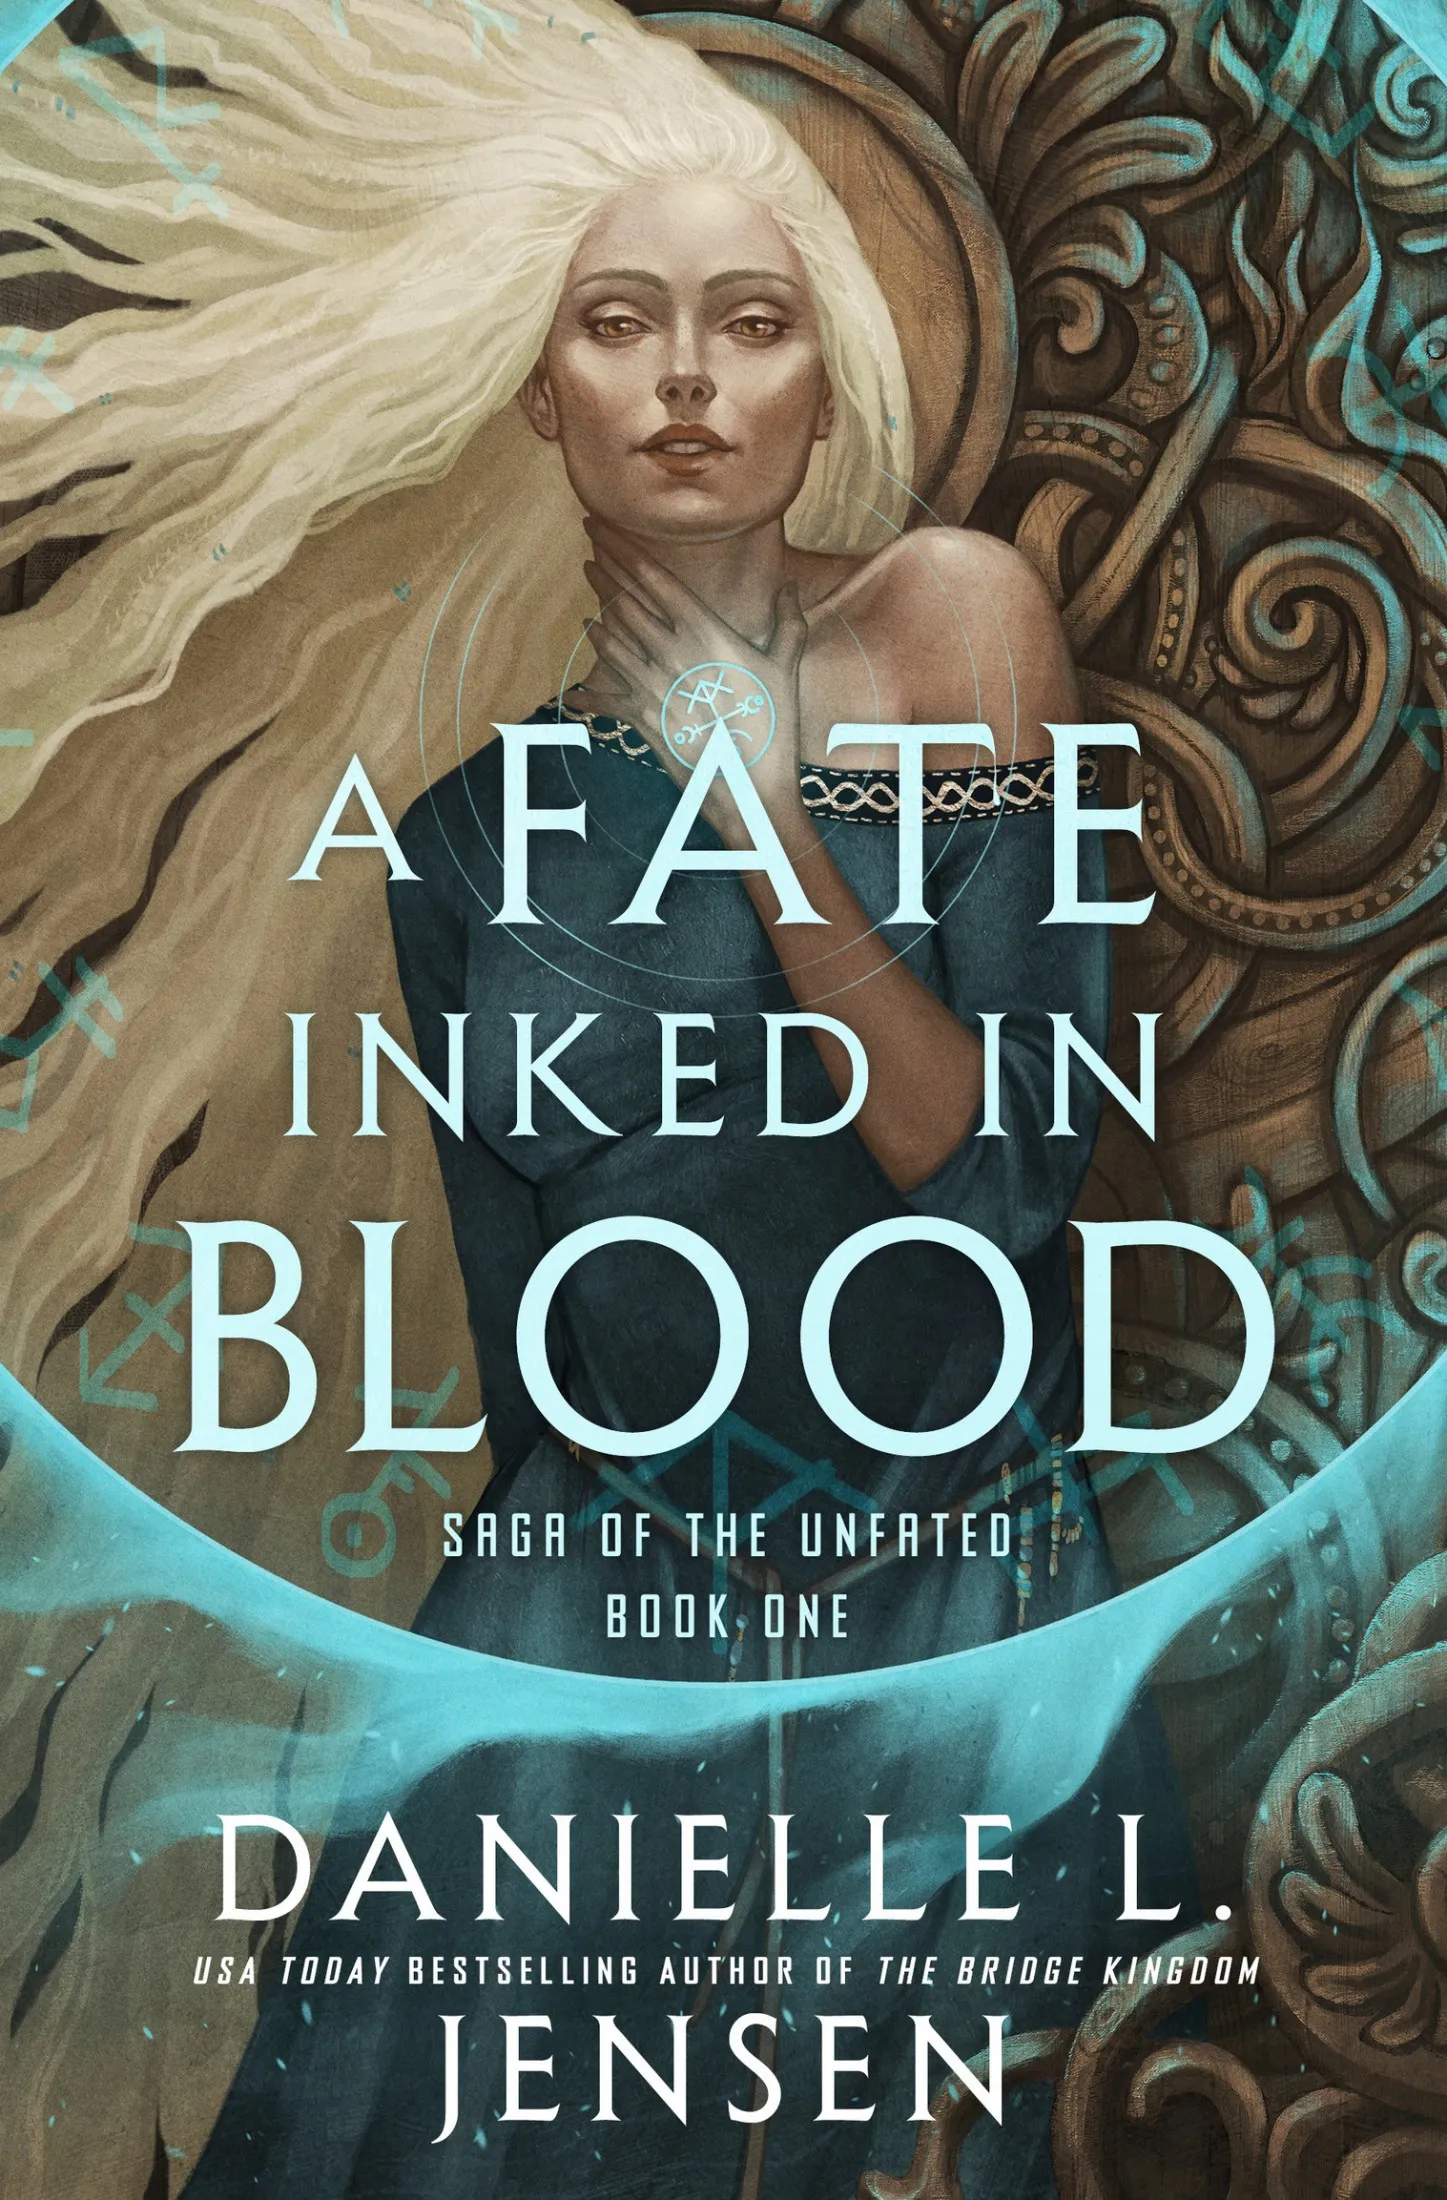 A Fate Inked in Blood (Saga of the Unfated #1)